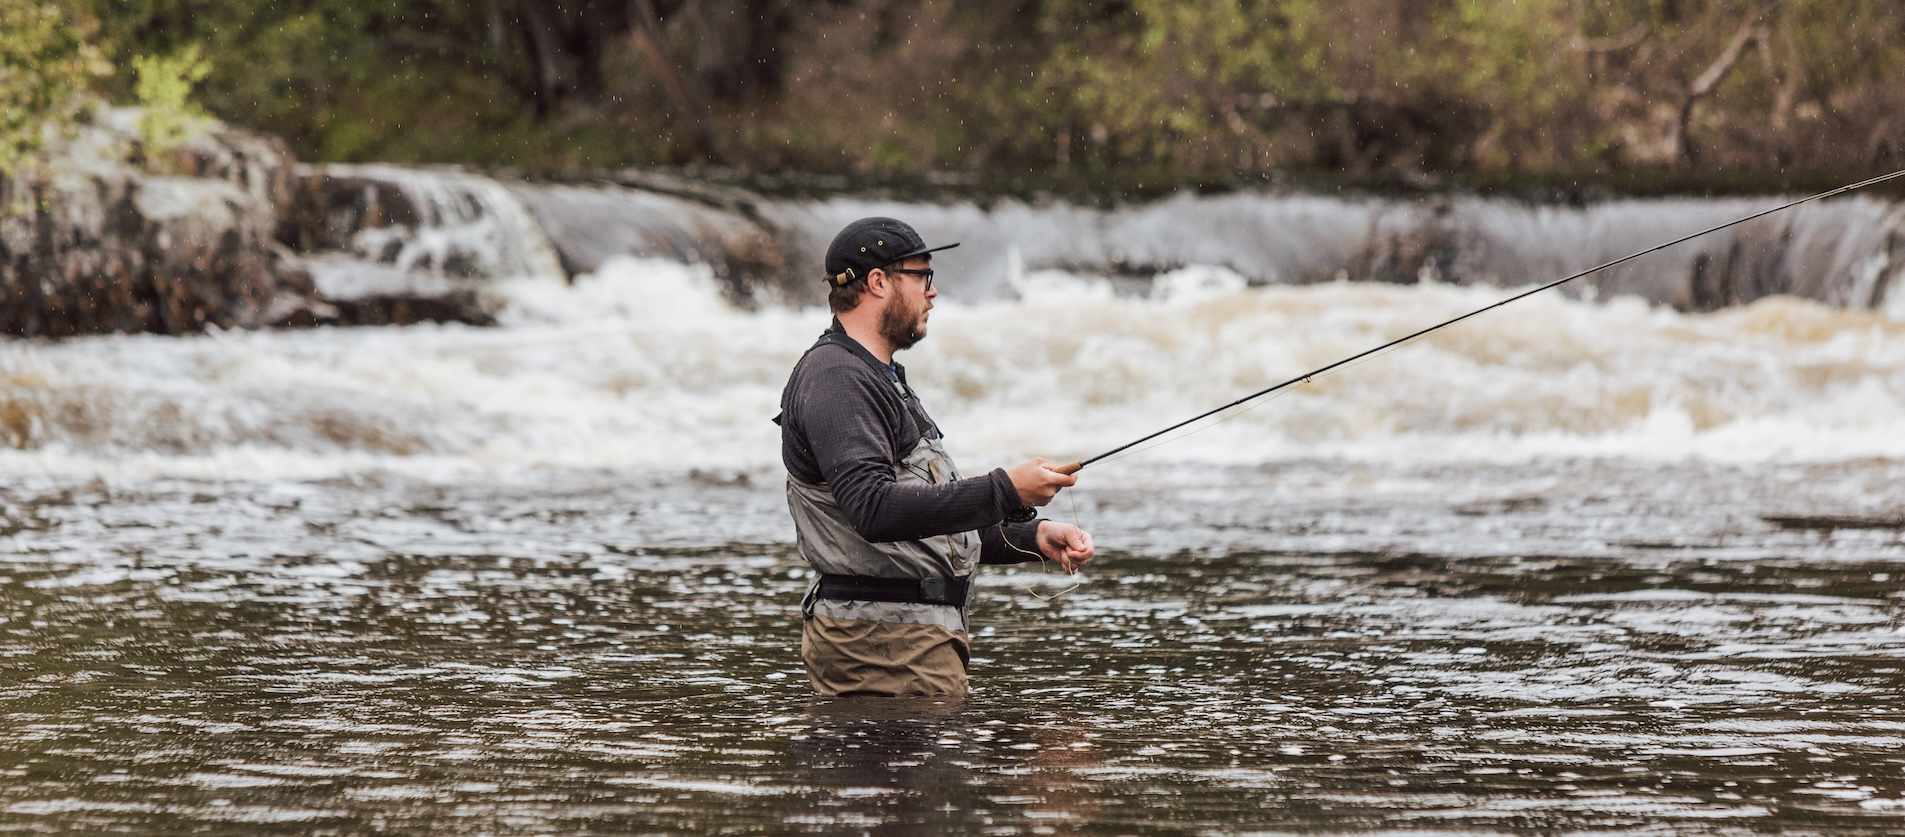 The Top Fishing Influencers to Follow Right Now